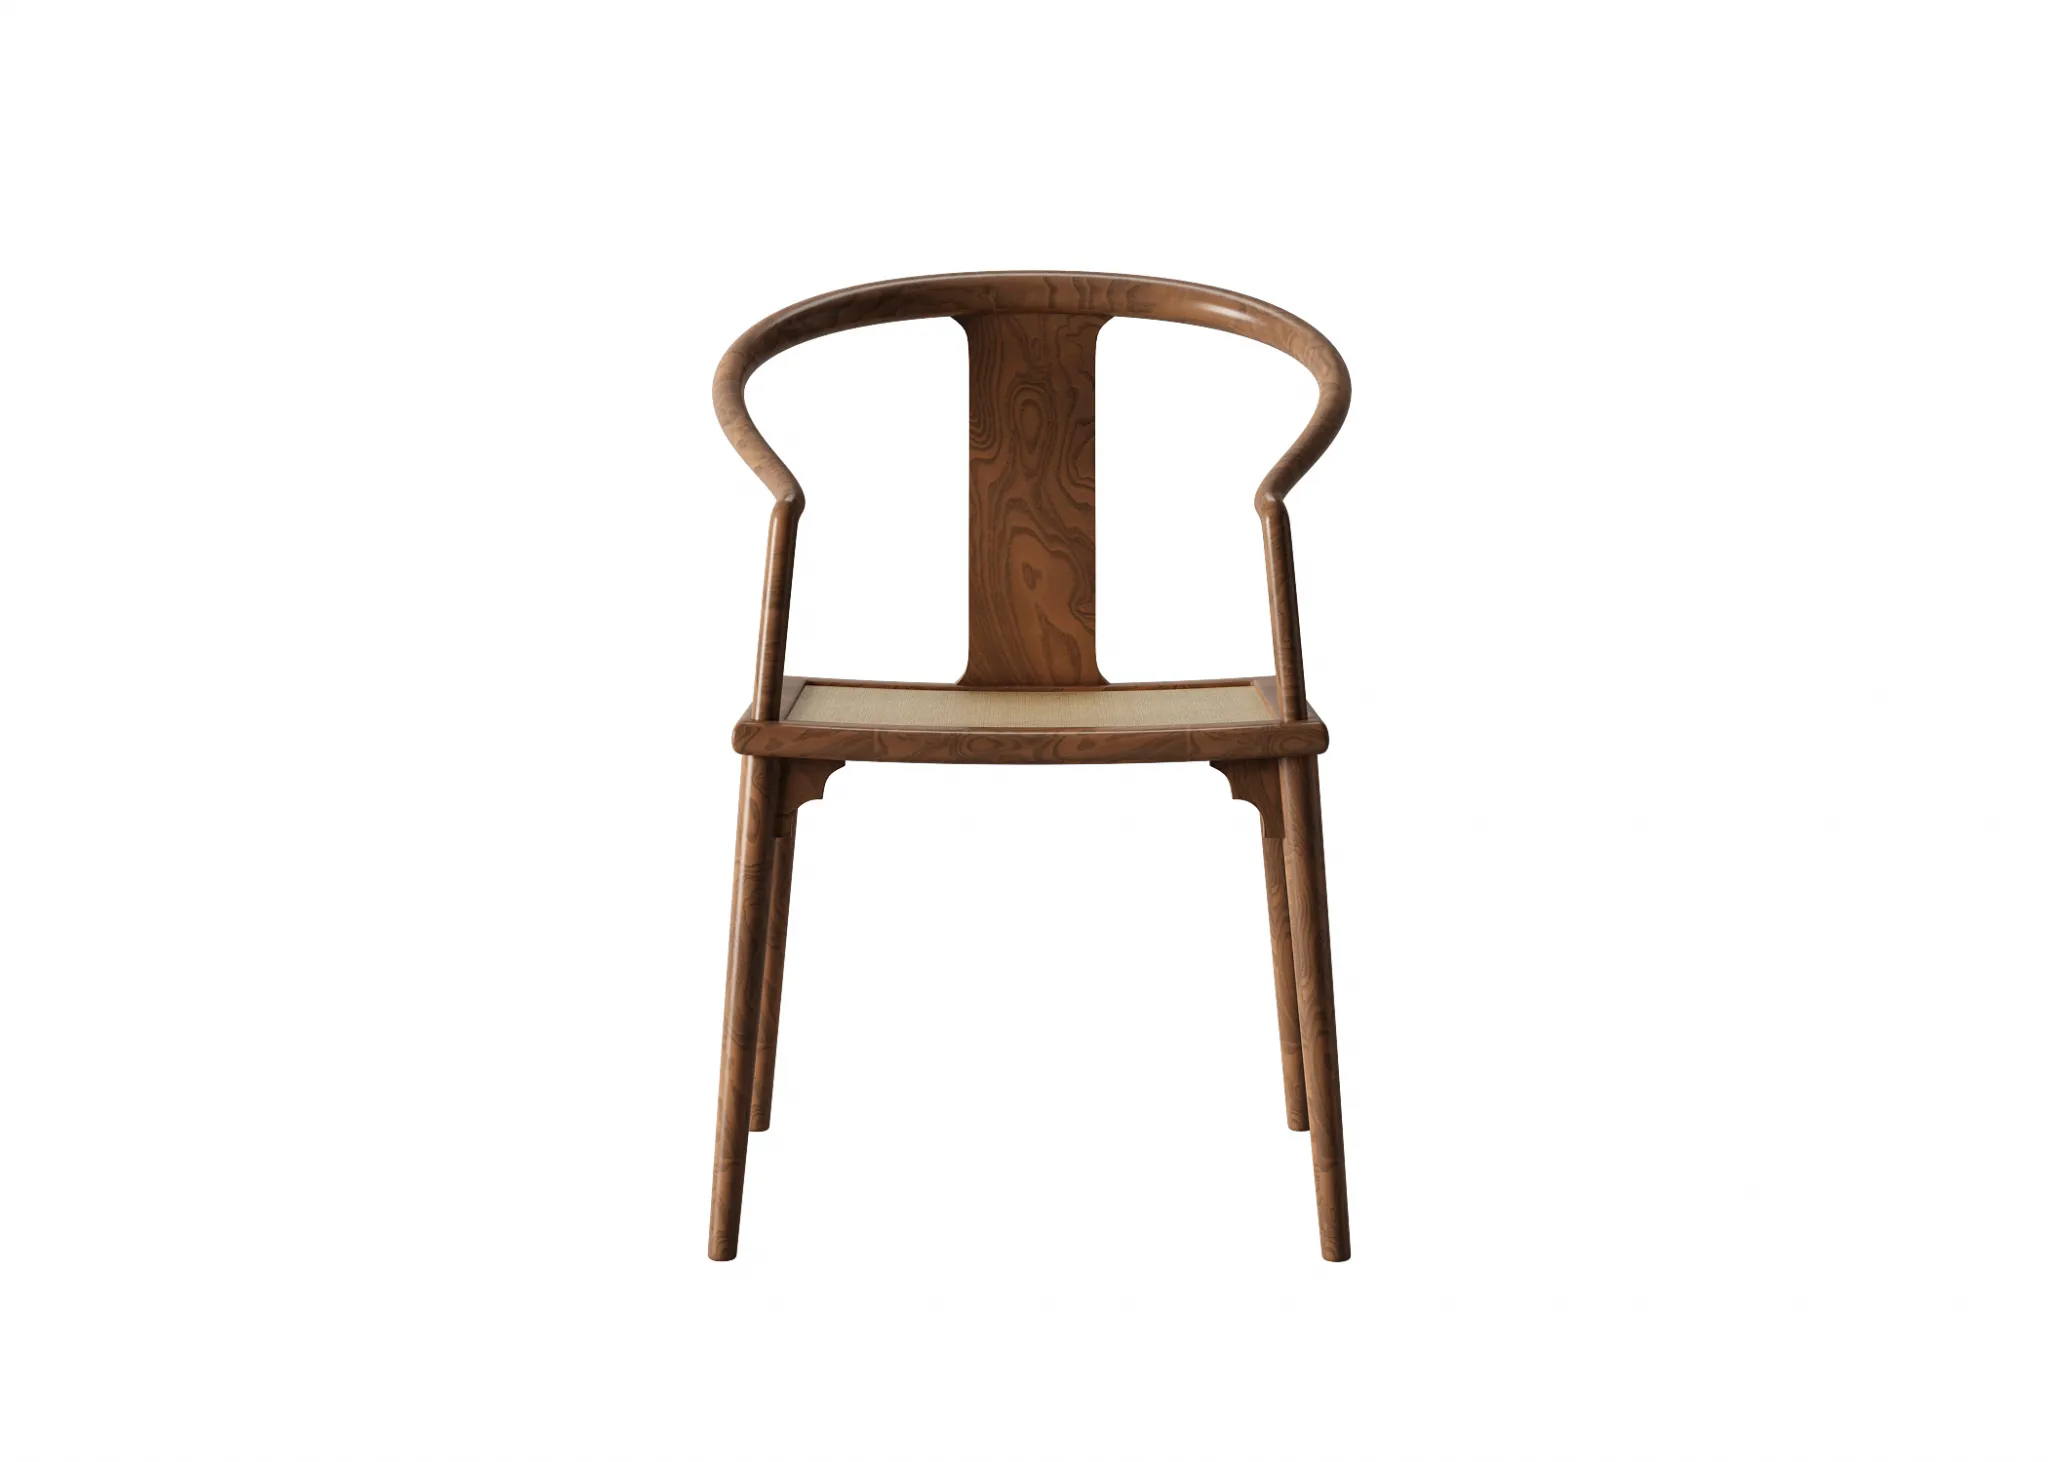 FURNITURE 3D MODELS – CHAIRS – 0472